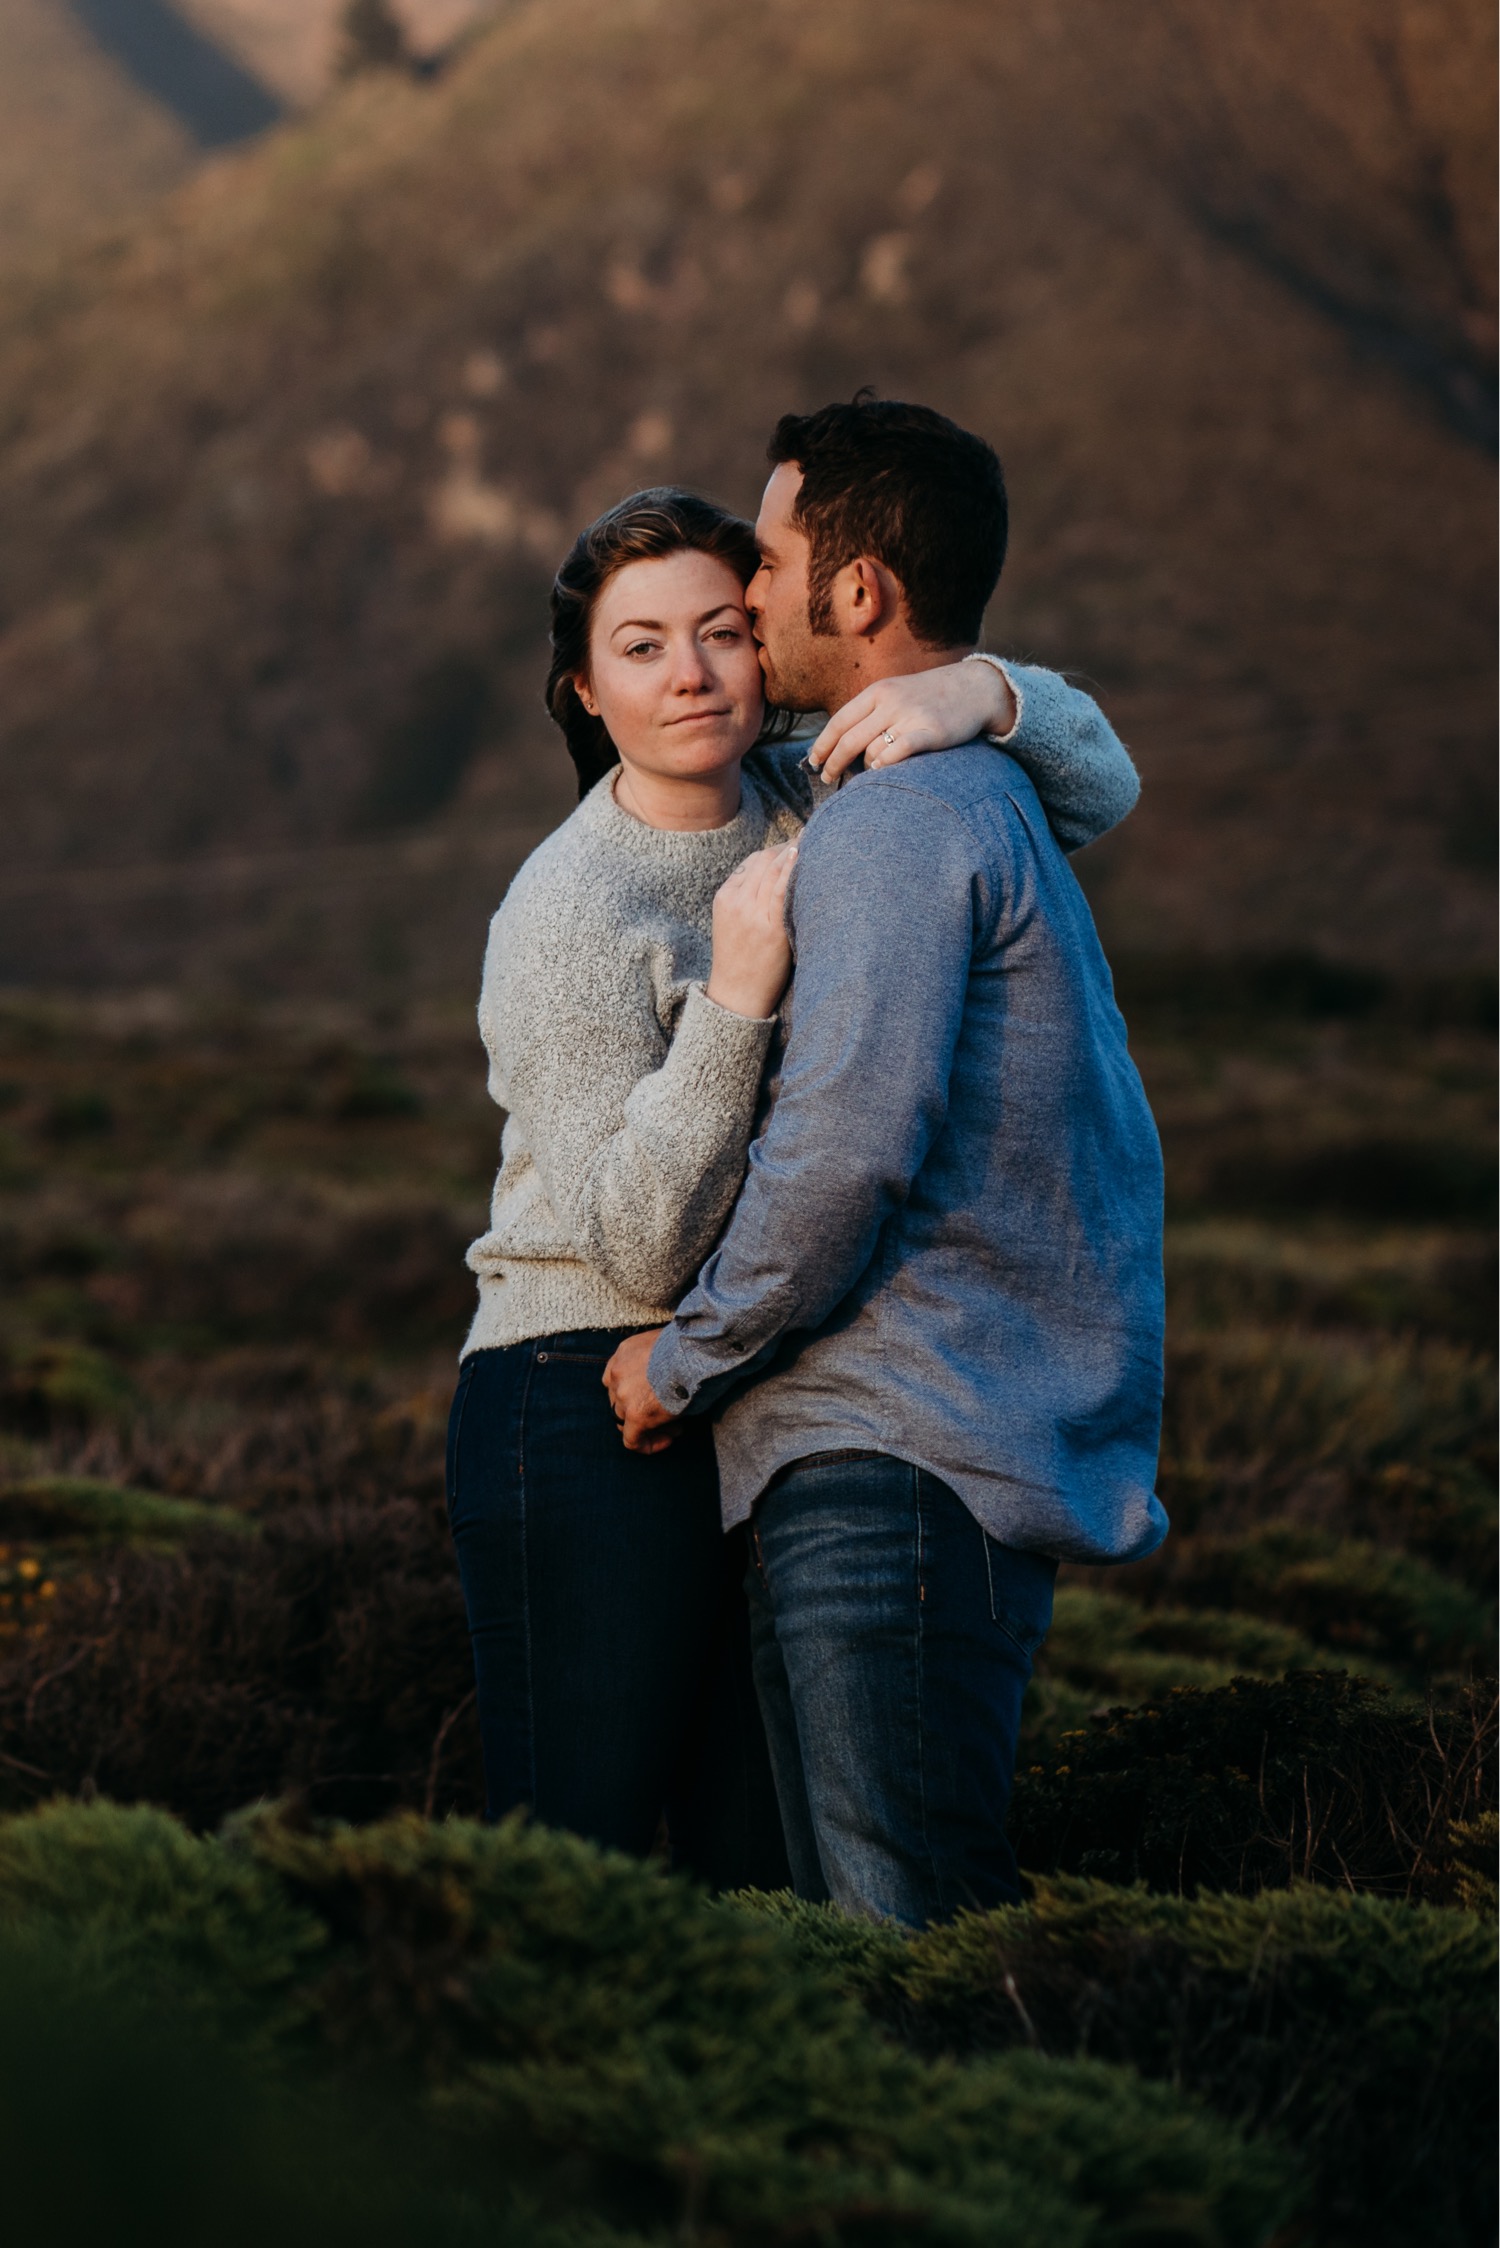 Couple embraces during their engagement photoshoot in Big Sur, California. The woman gazes at the camera as the man kisses her forehead.